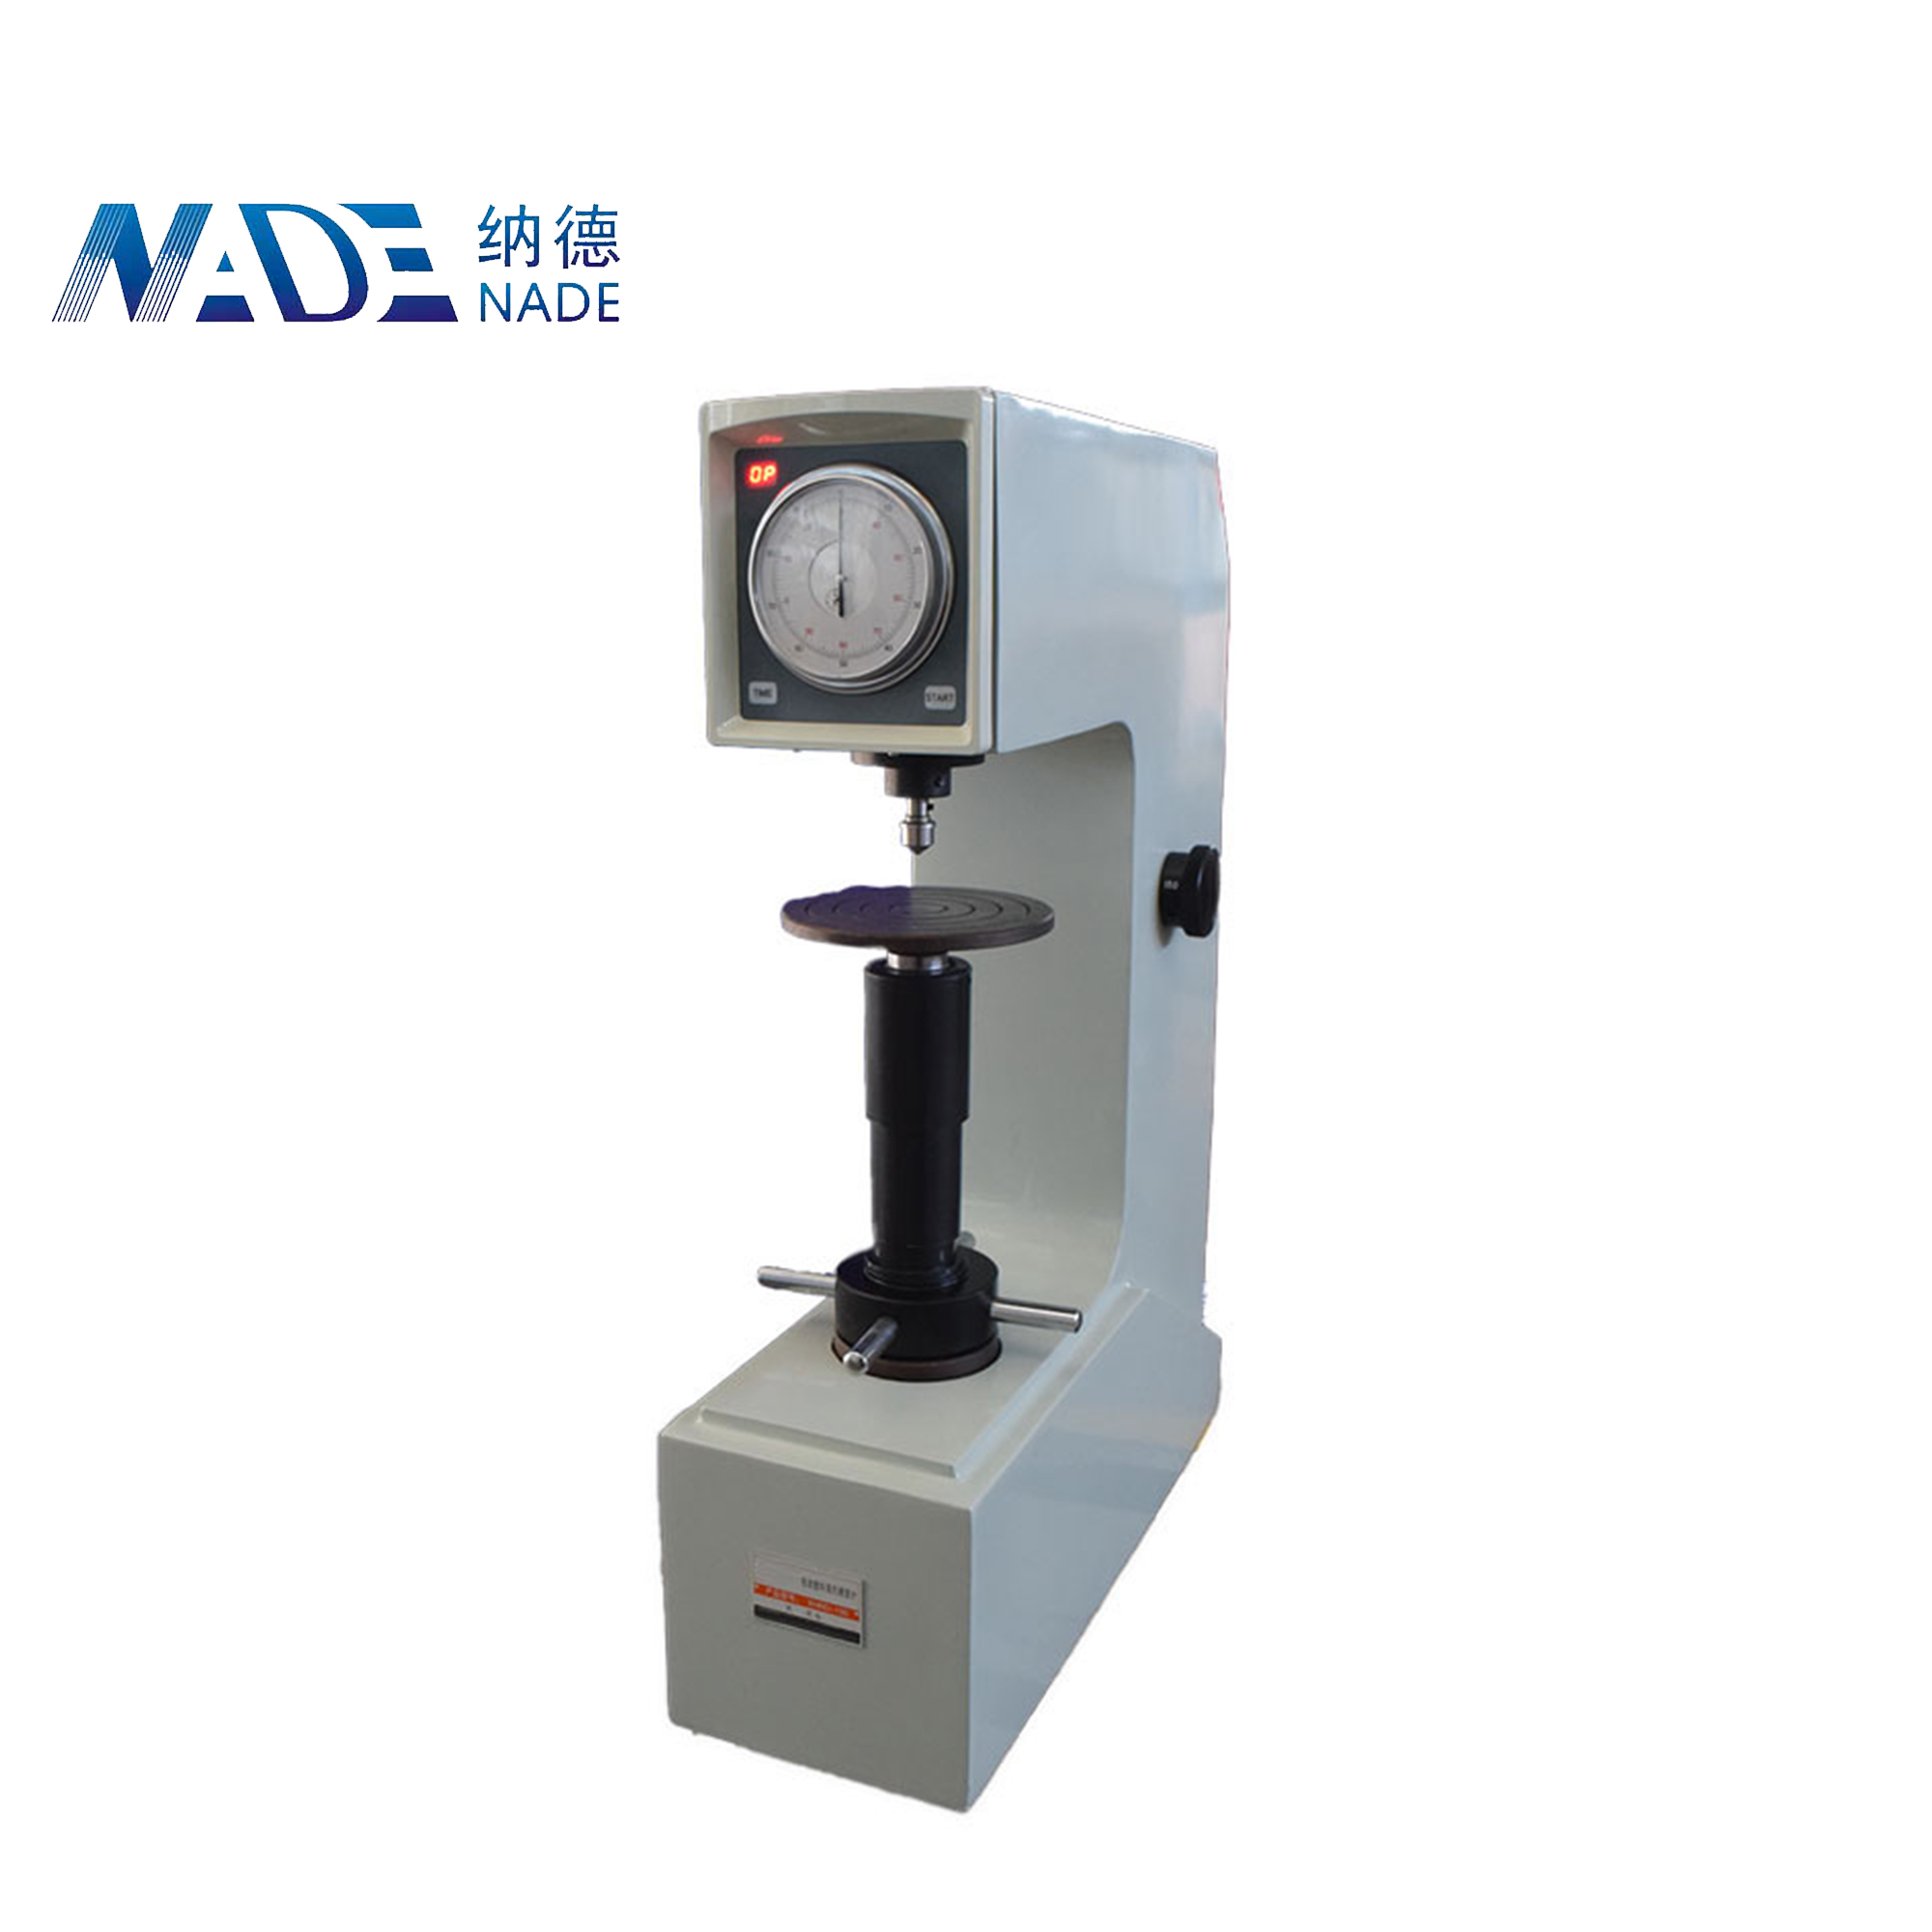 NADE XHRD-150 Electric Plastic rockwell hardness tester for plastic, composite materials, soft metals